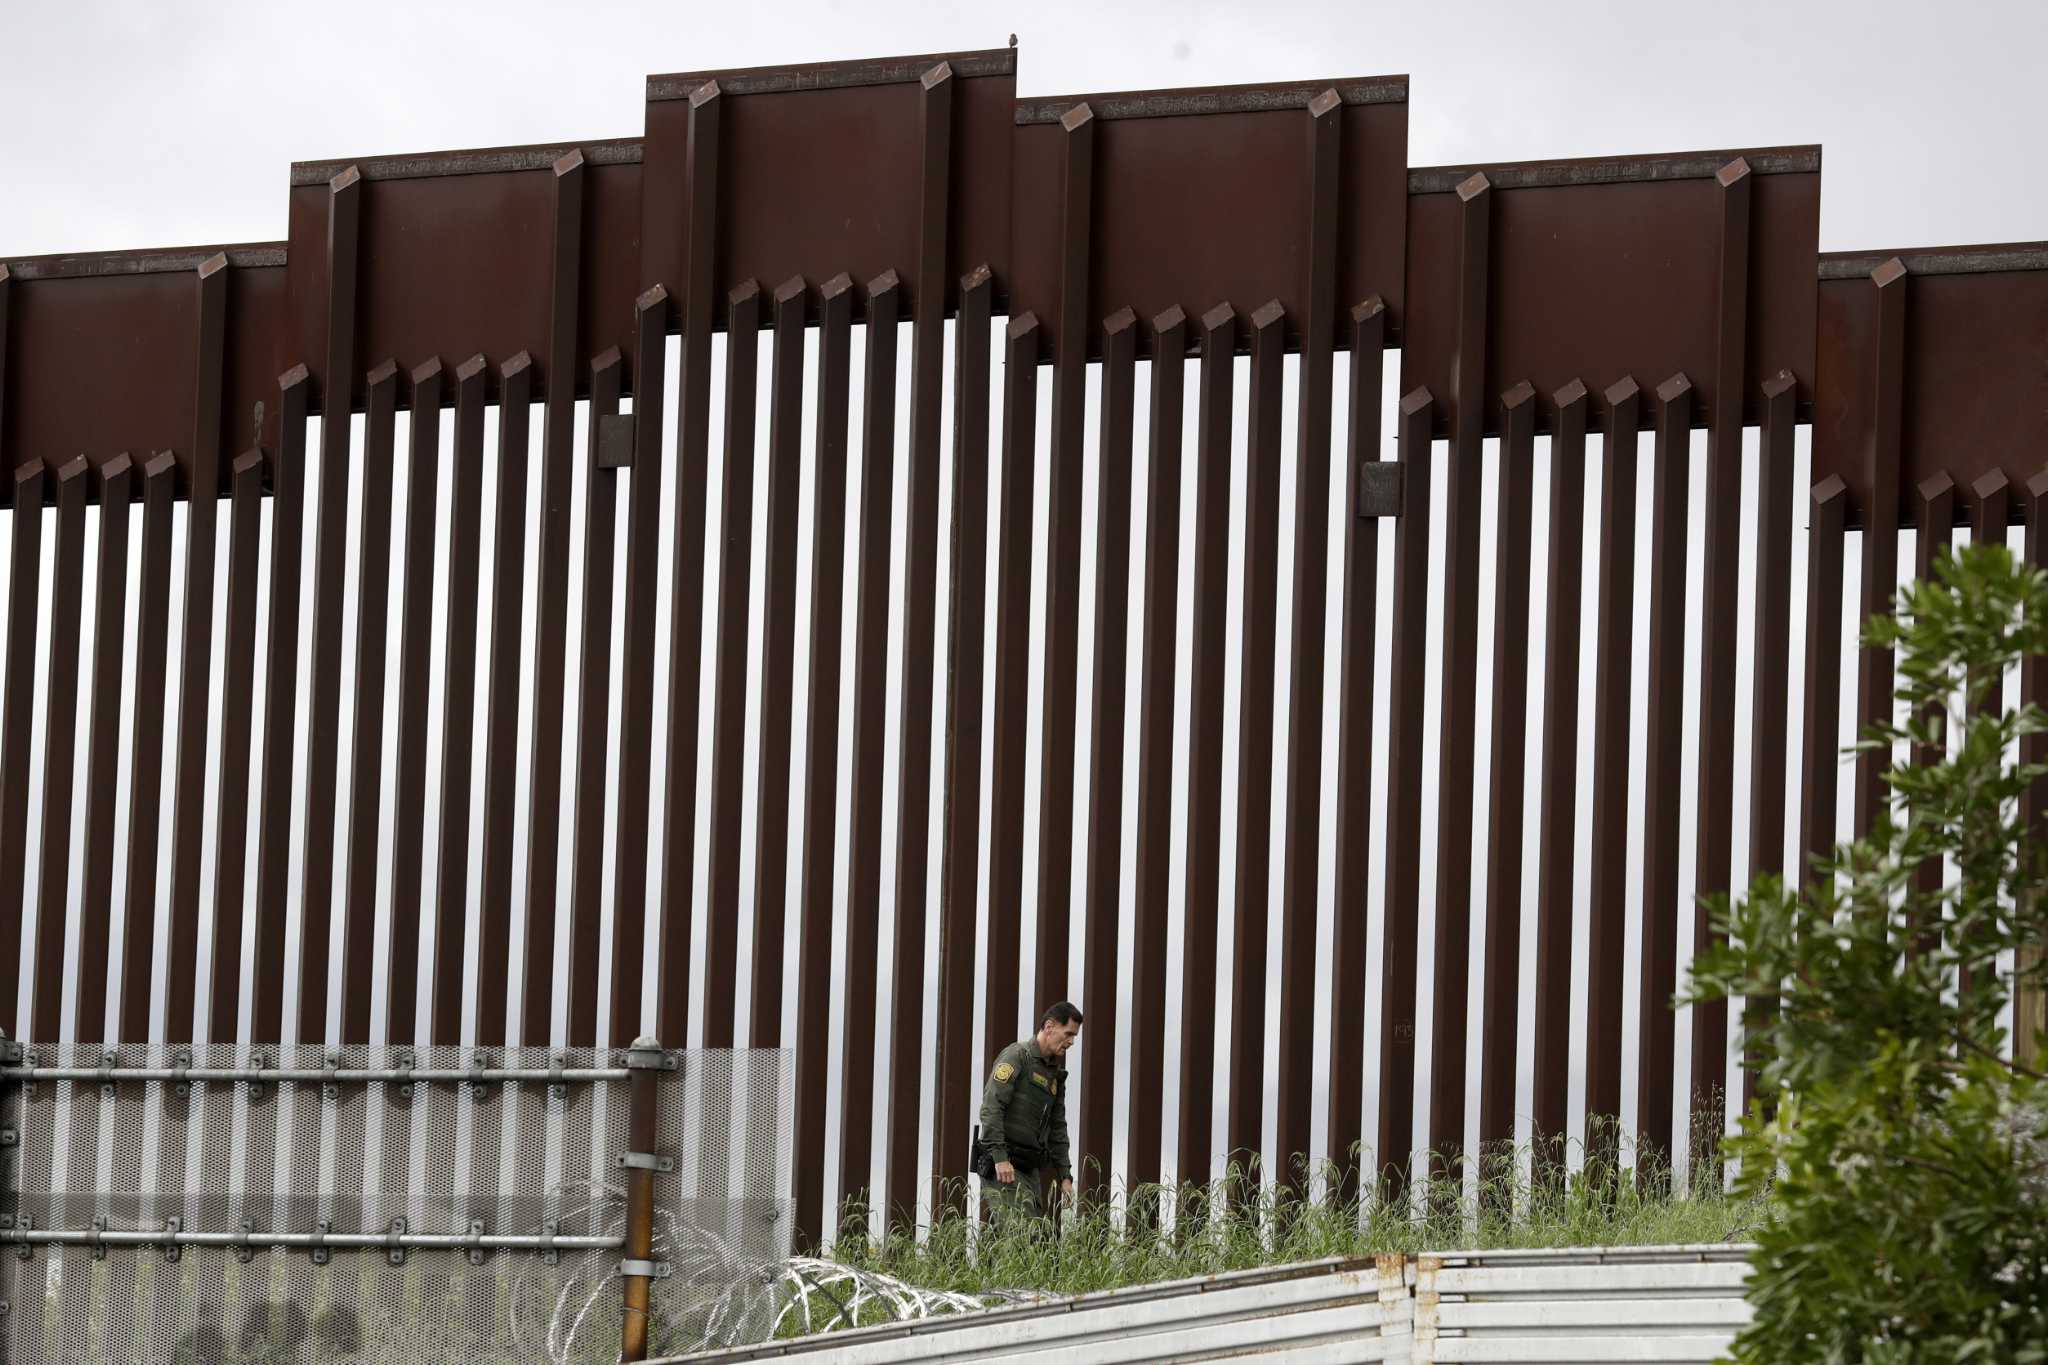 Falls from wall at US-Mexico border injure 11, including 10 who were ...